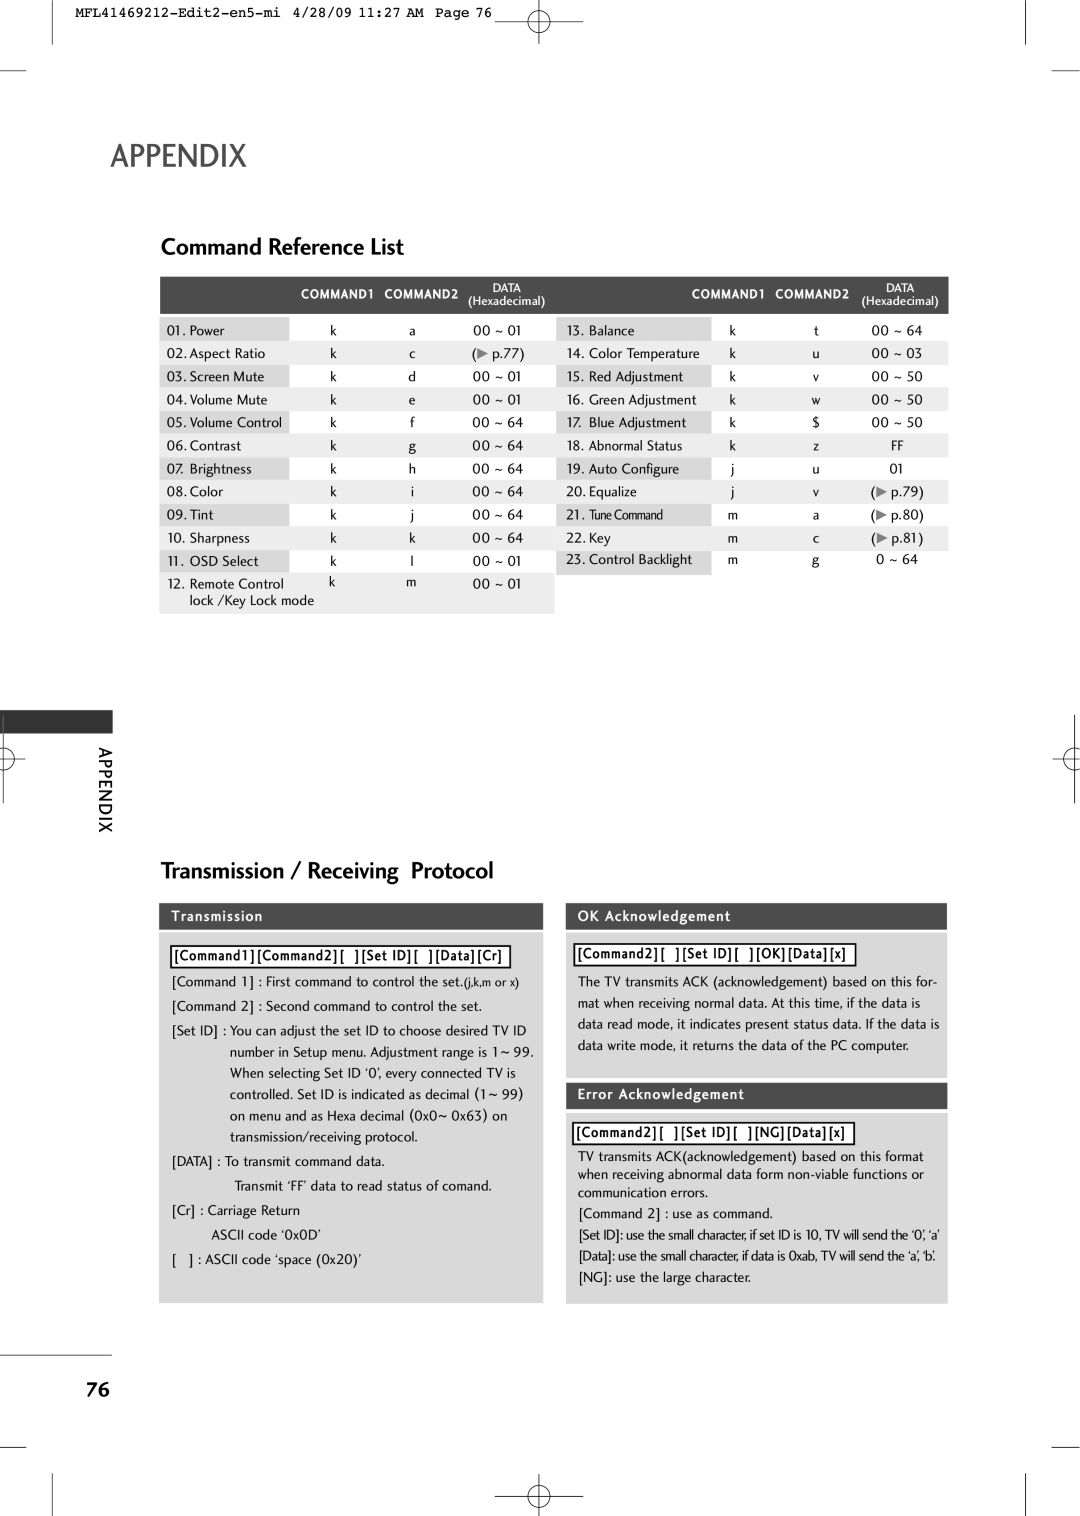 LG Electronics 2230R-MA manual Command Reference List, Appendix, Transmission / Receiving Protocol, OK Acknowledgement 